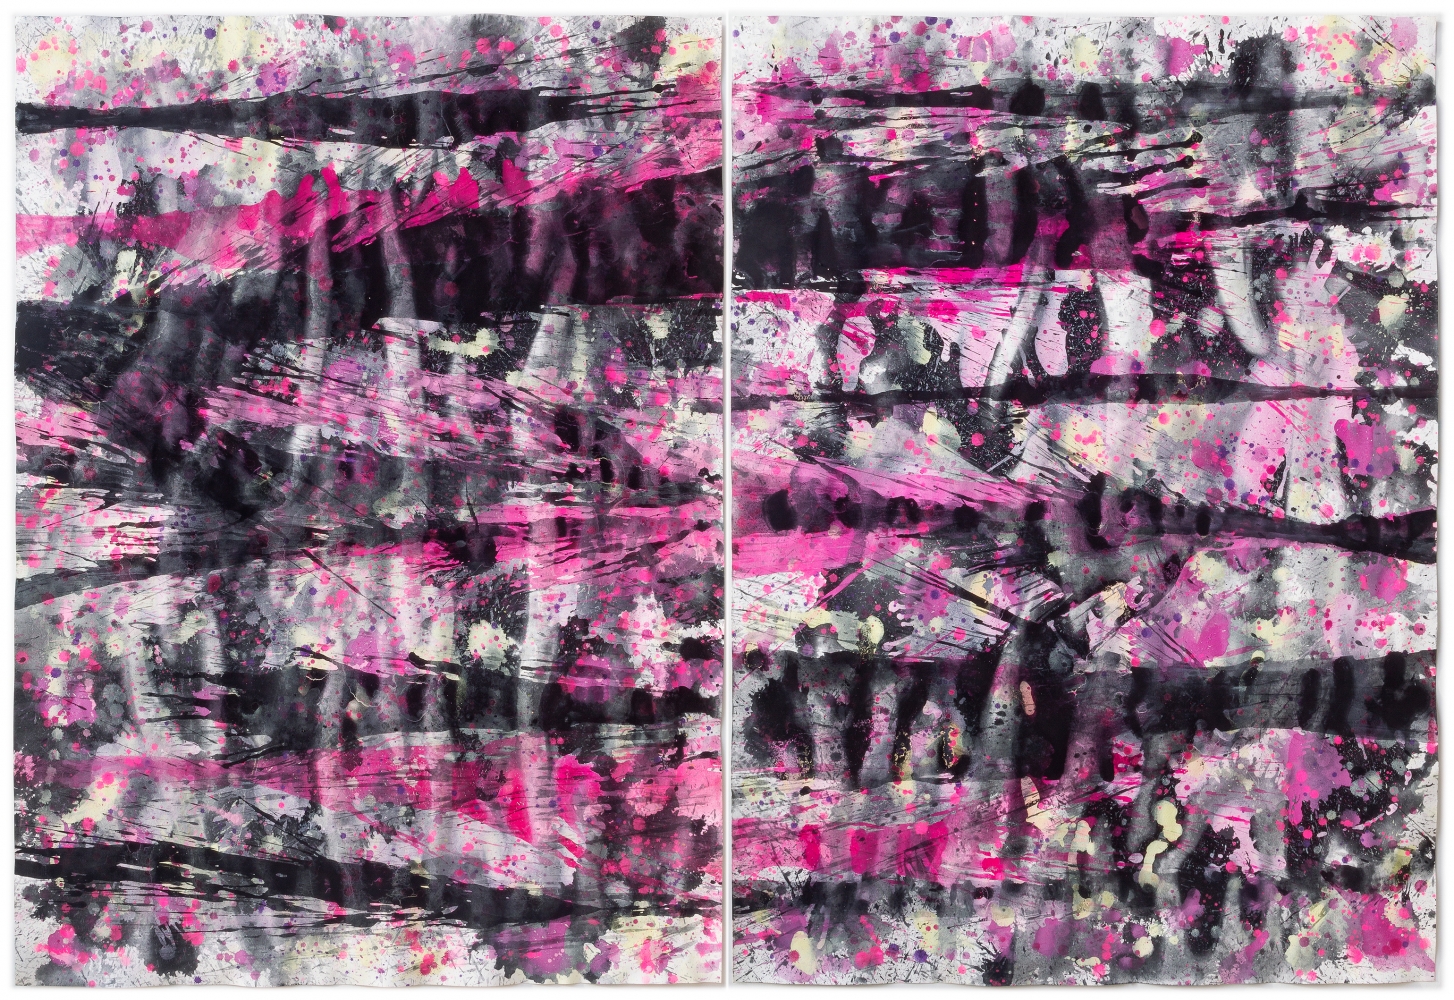 J. Steven Manolis-Flamingo 2014.02, gouache and watercolor painting on paper, 60 x 88 inches (2 panels 60 x 44 inches each), Pink Abstract Art, Tropical Watercolor paintings for sale at Manolis Projects Art Gallery, Miami, Fl